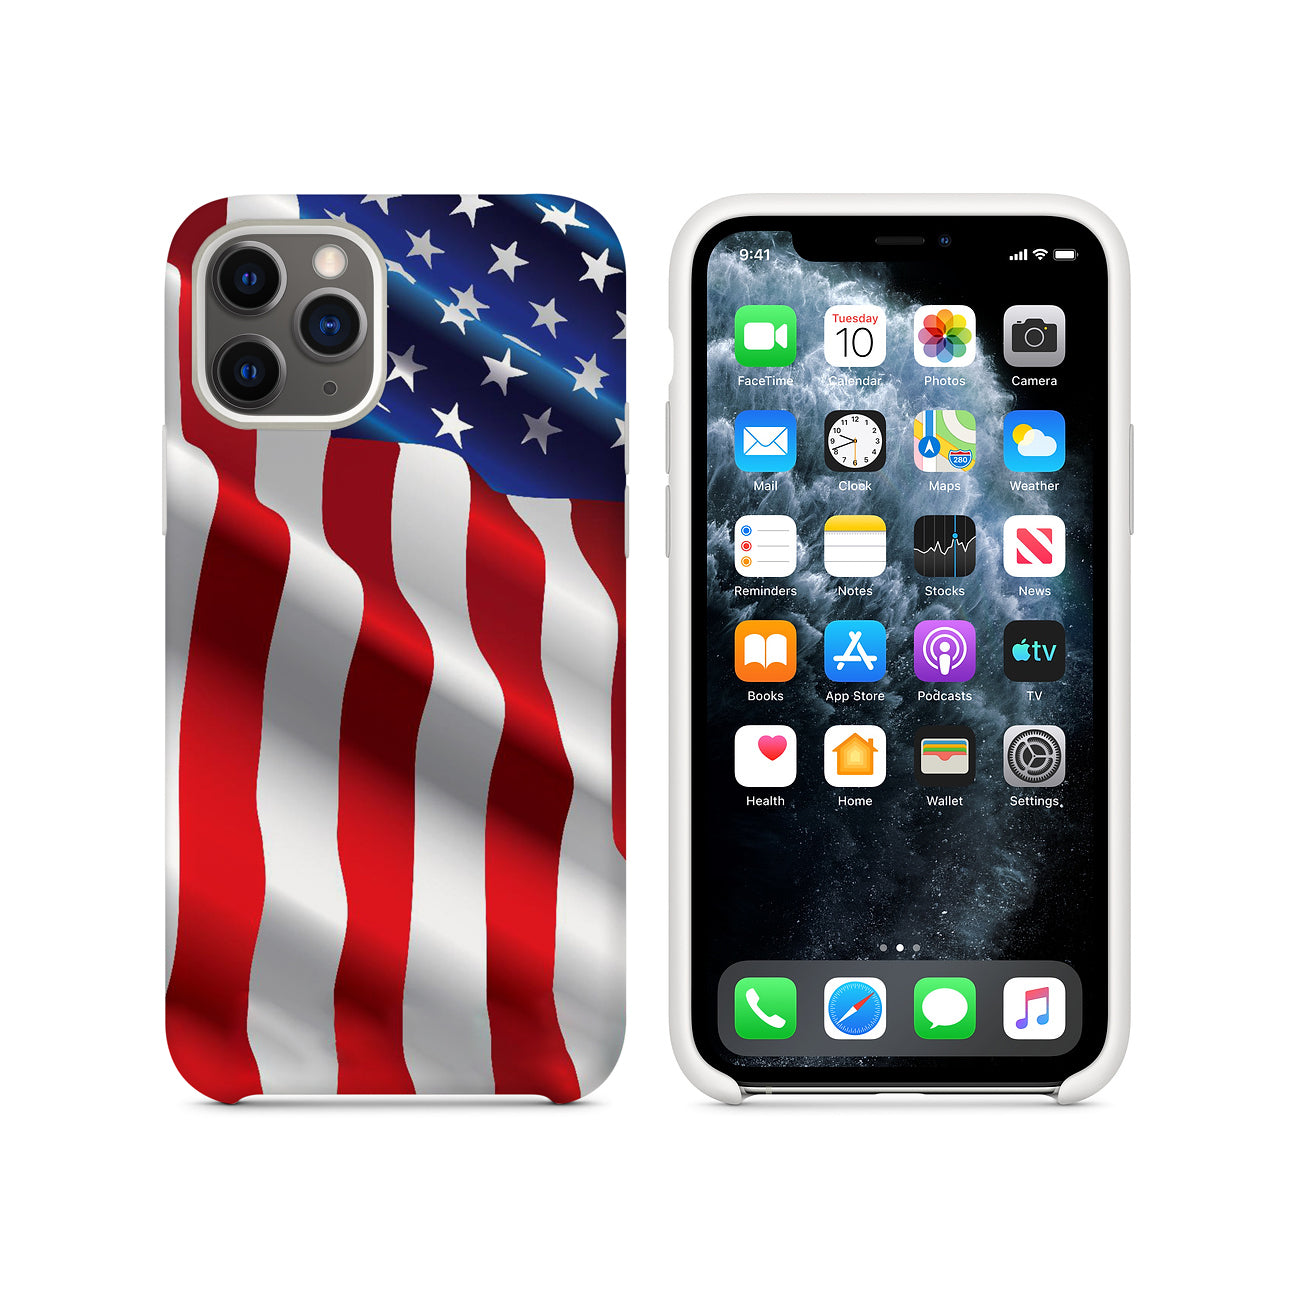 Eagle Design Case For APPLE IPHONE 11 PRO MAX In Mix